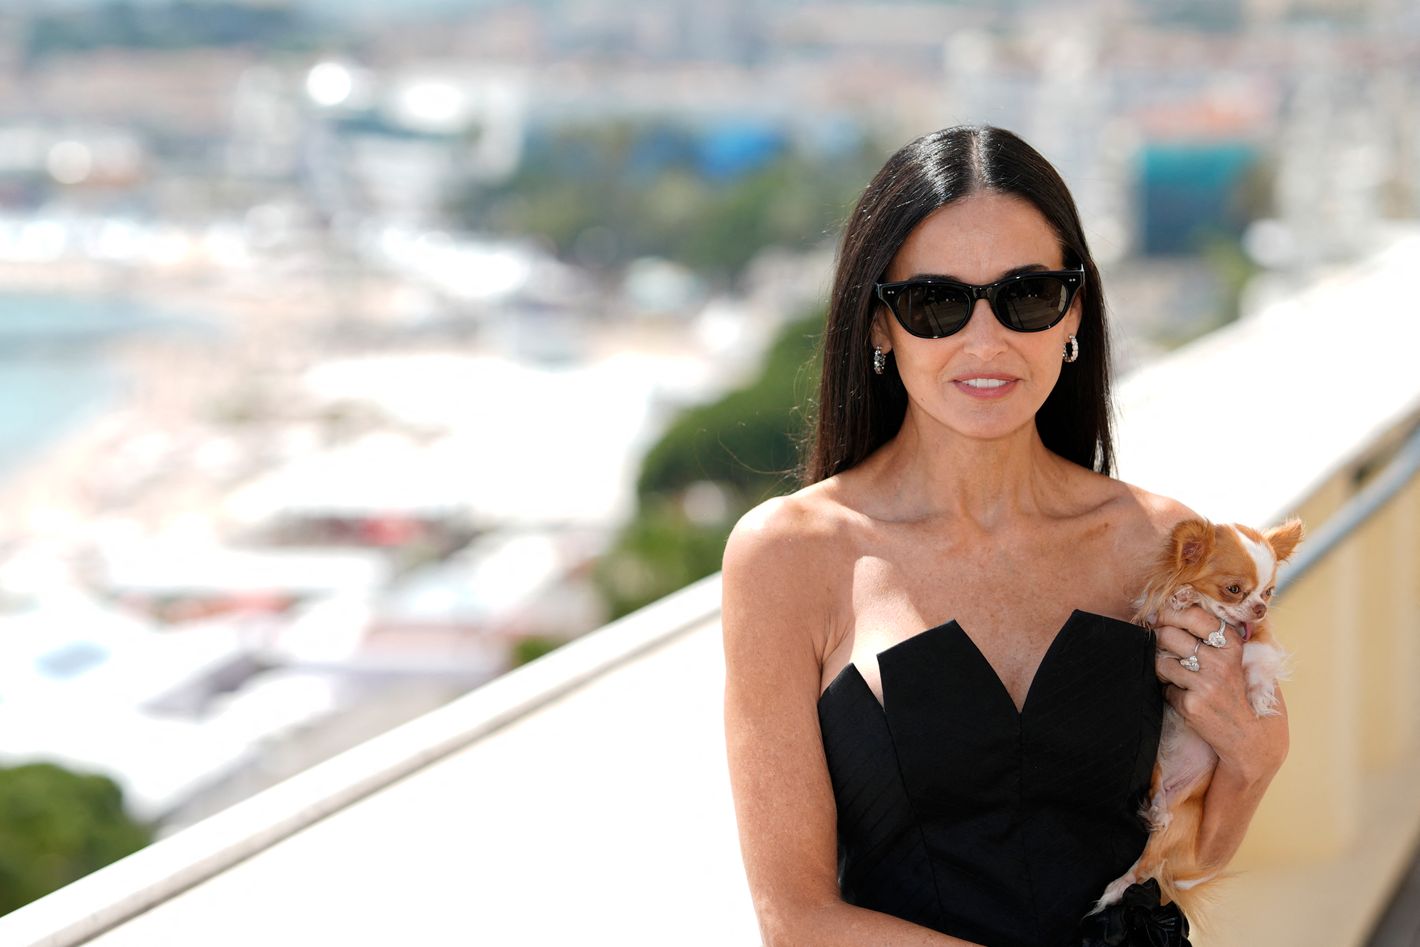 Demi Moore Brought Her Tiny Dog to Cannes